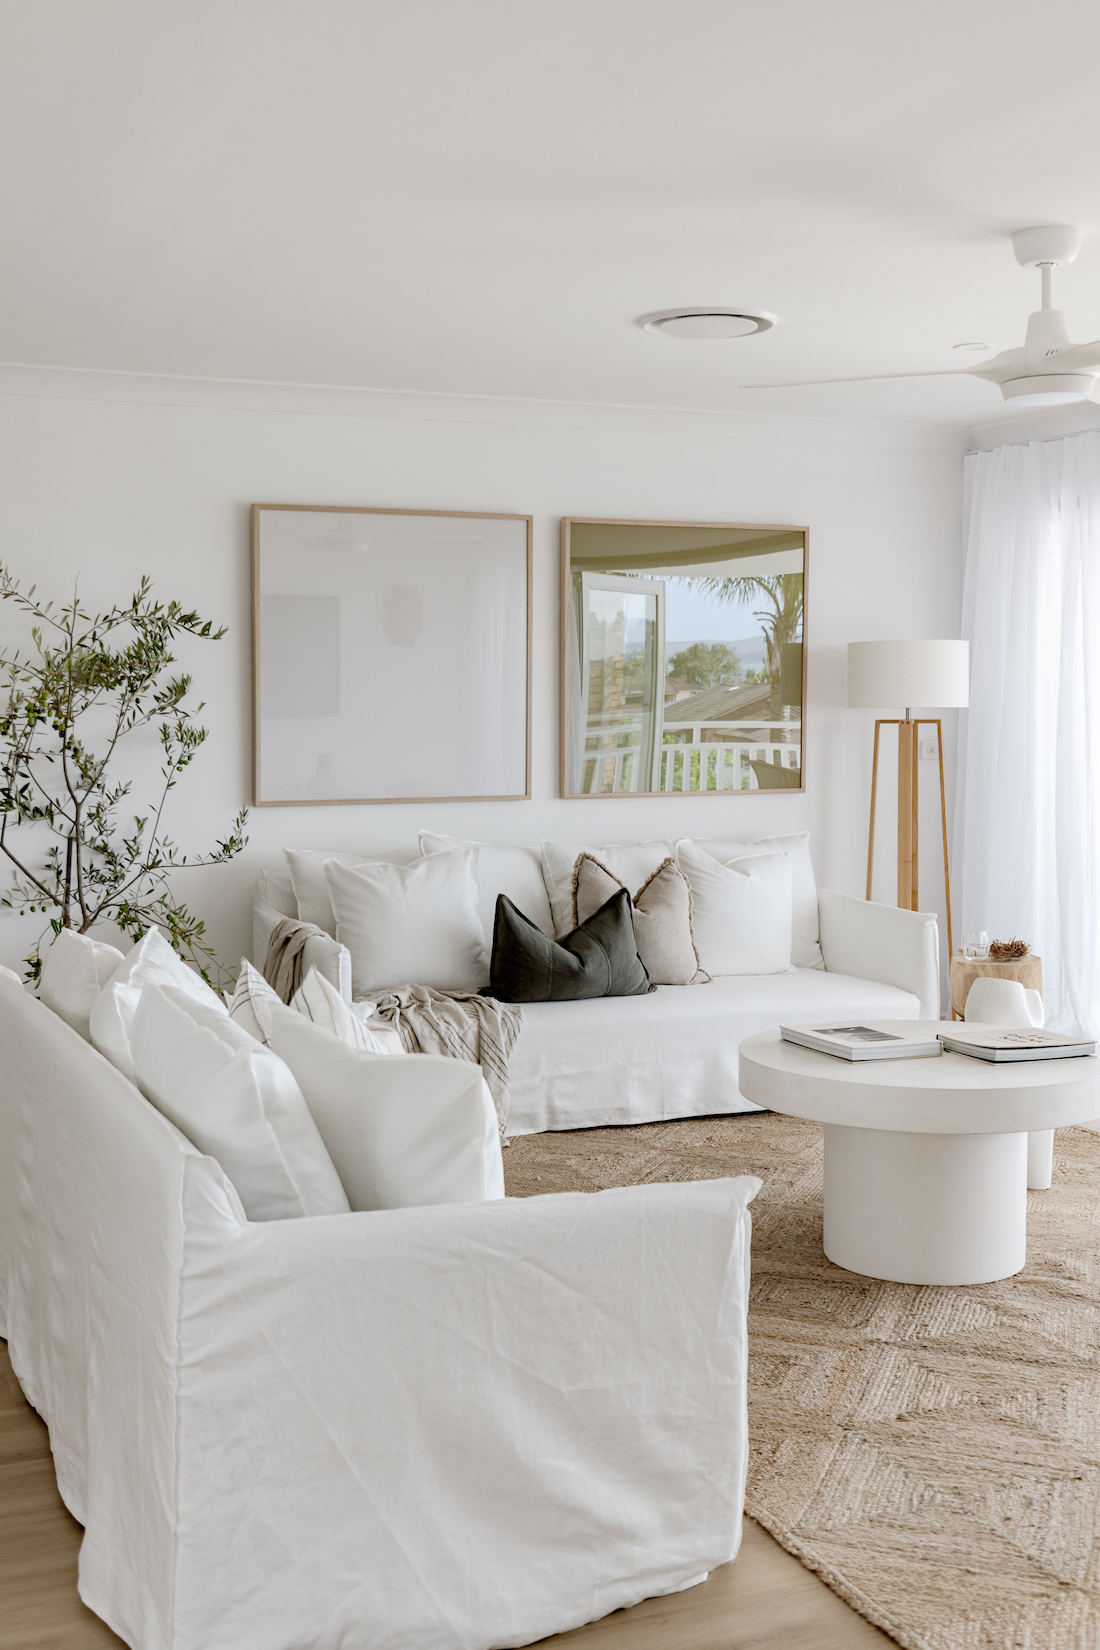 Living room style in coastal home